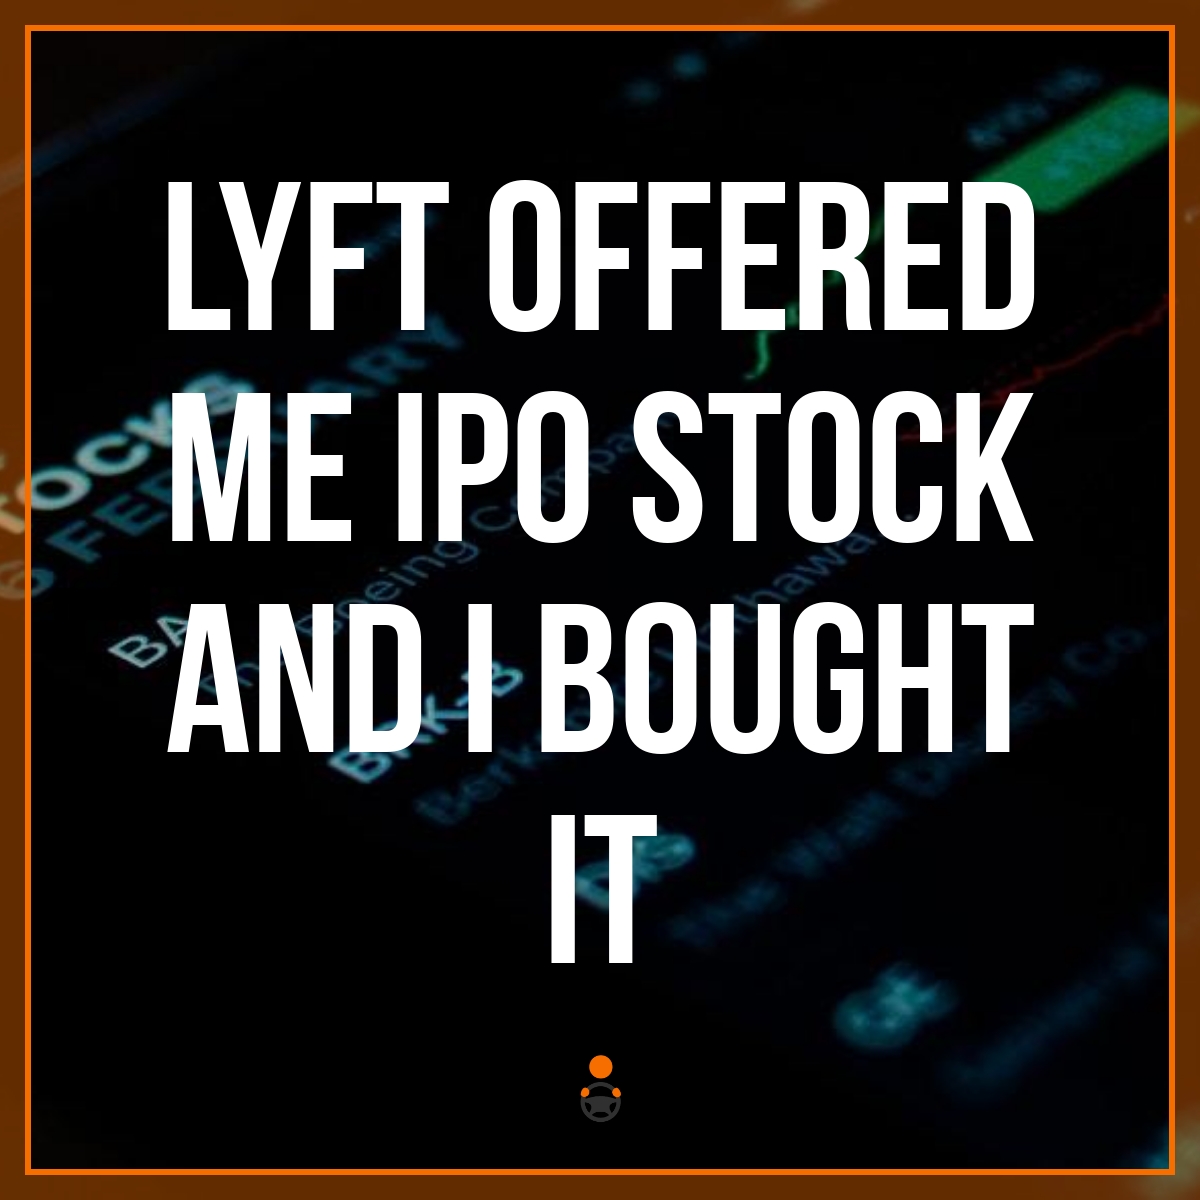 Lyft Offered Me Some IPO Stock and I Bought It